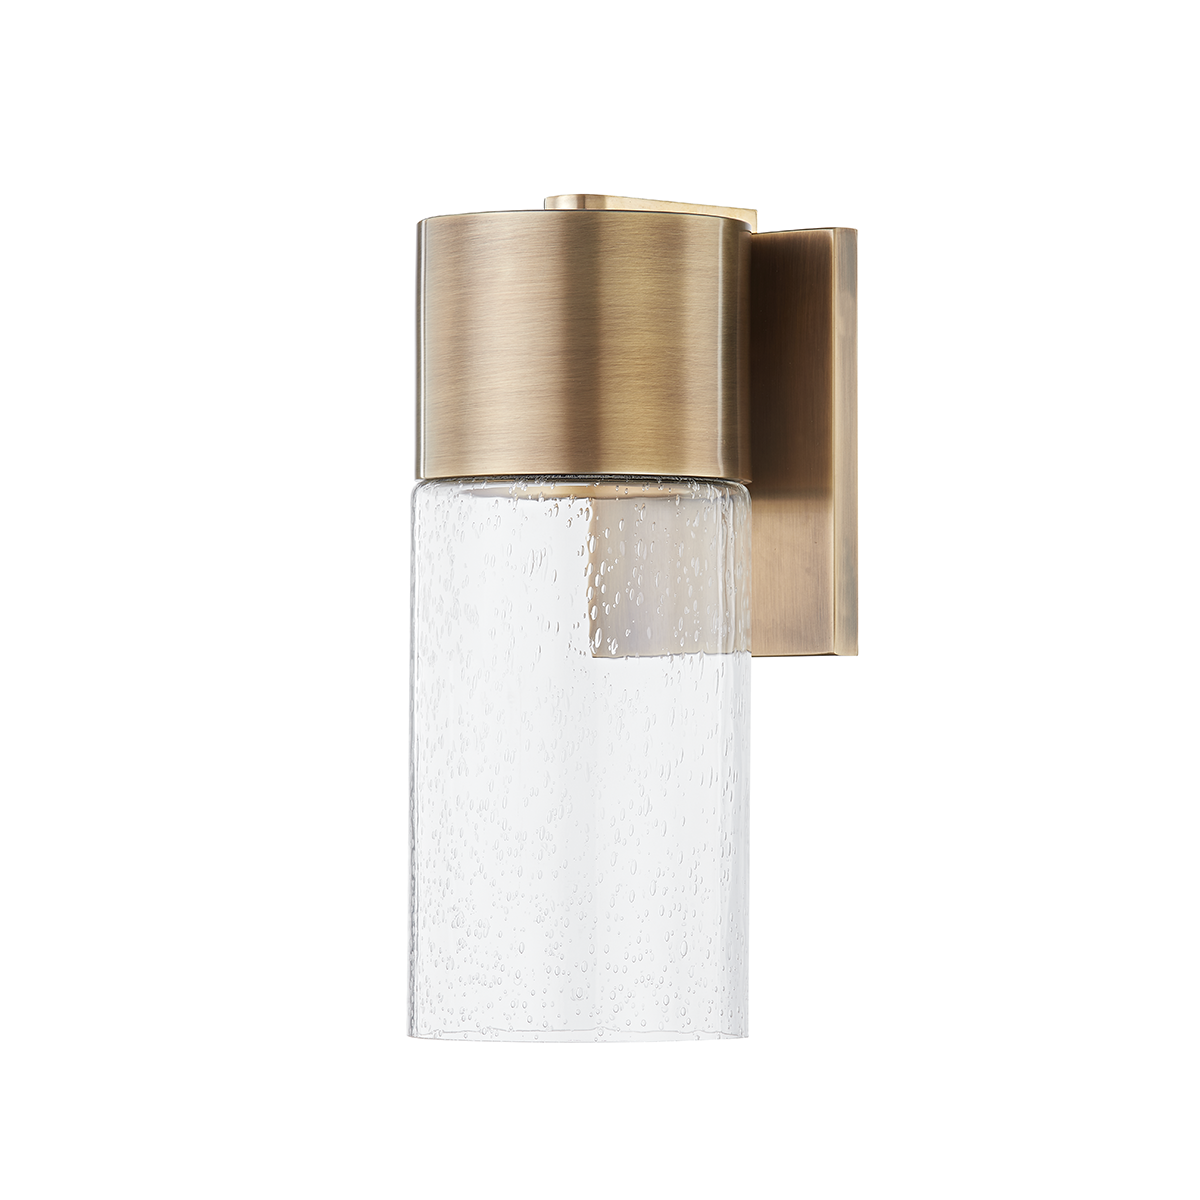 Troy Lighting 1 LIGHT SMALL EXTERIOR WALL SCONCE B5115